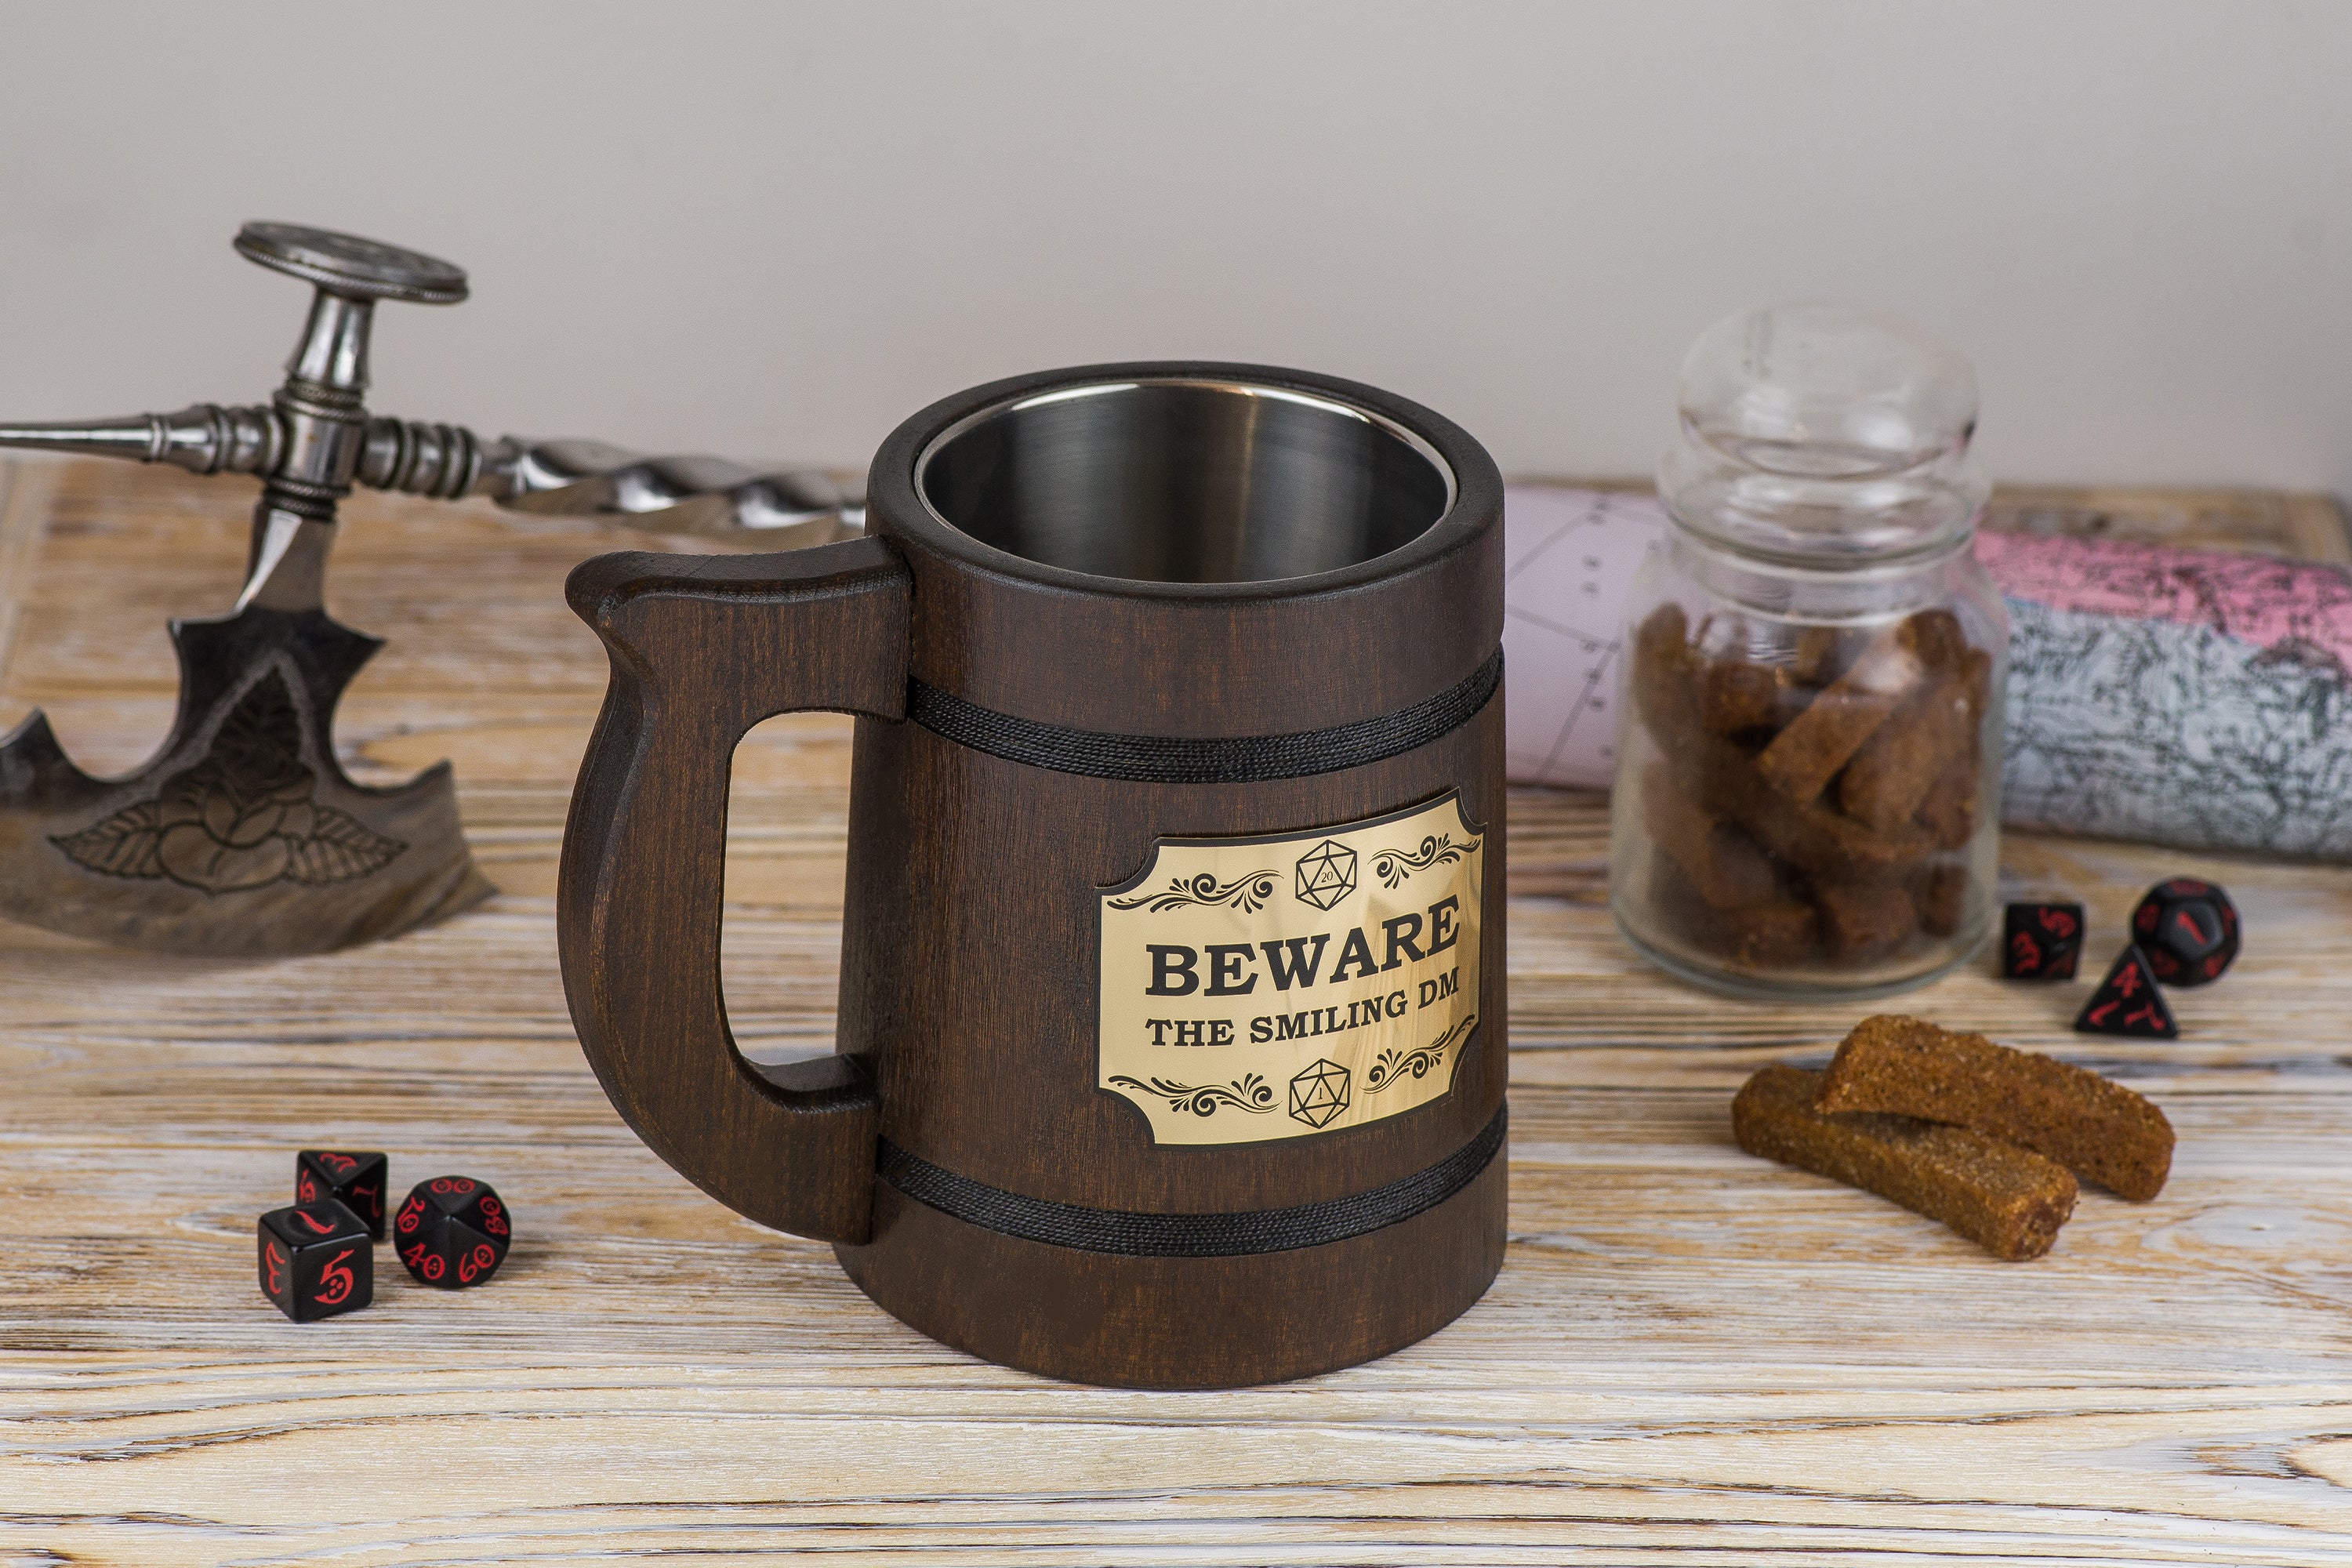 Dungeon Master personalized wooden mug "BEWARE THE SMILING DM", DND Mugs - GravisCup